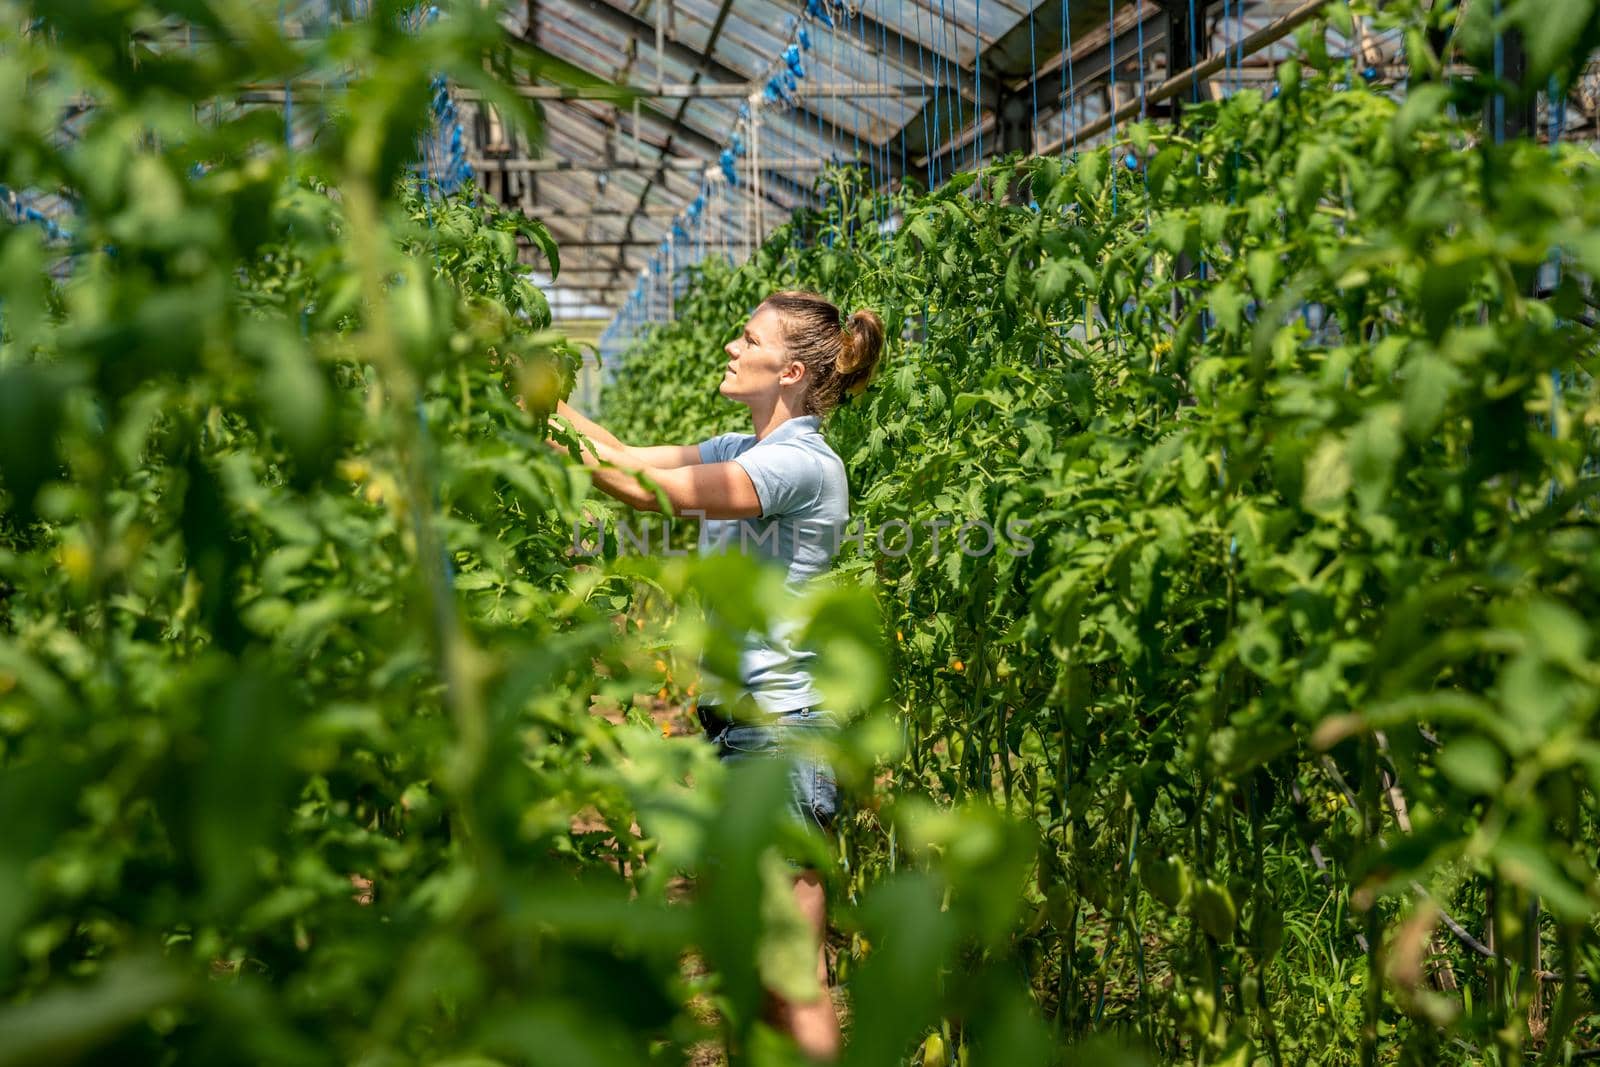 farmer takes care of tomatoes in a greenhouse on the farm by Edophoto